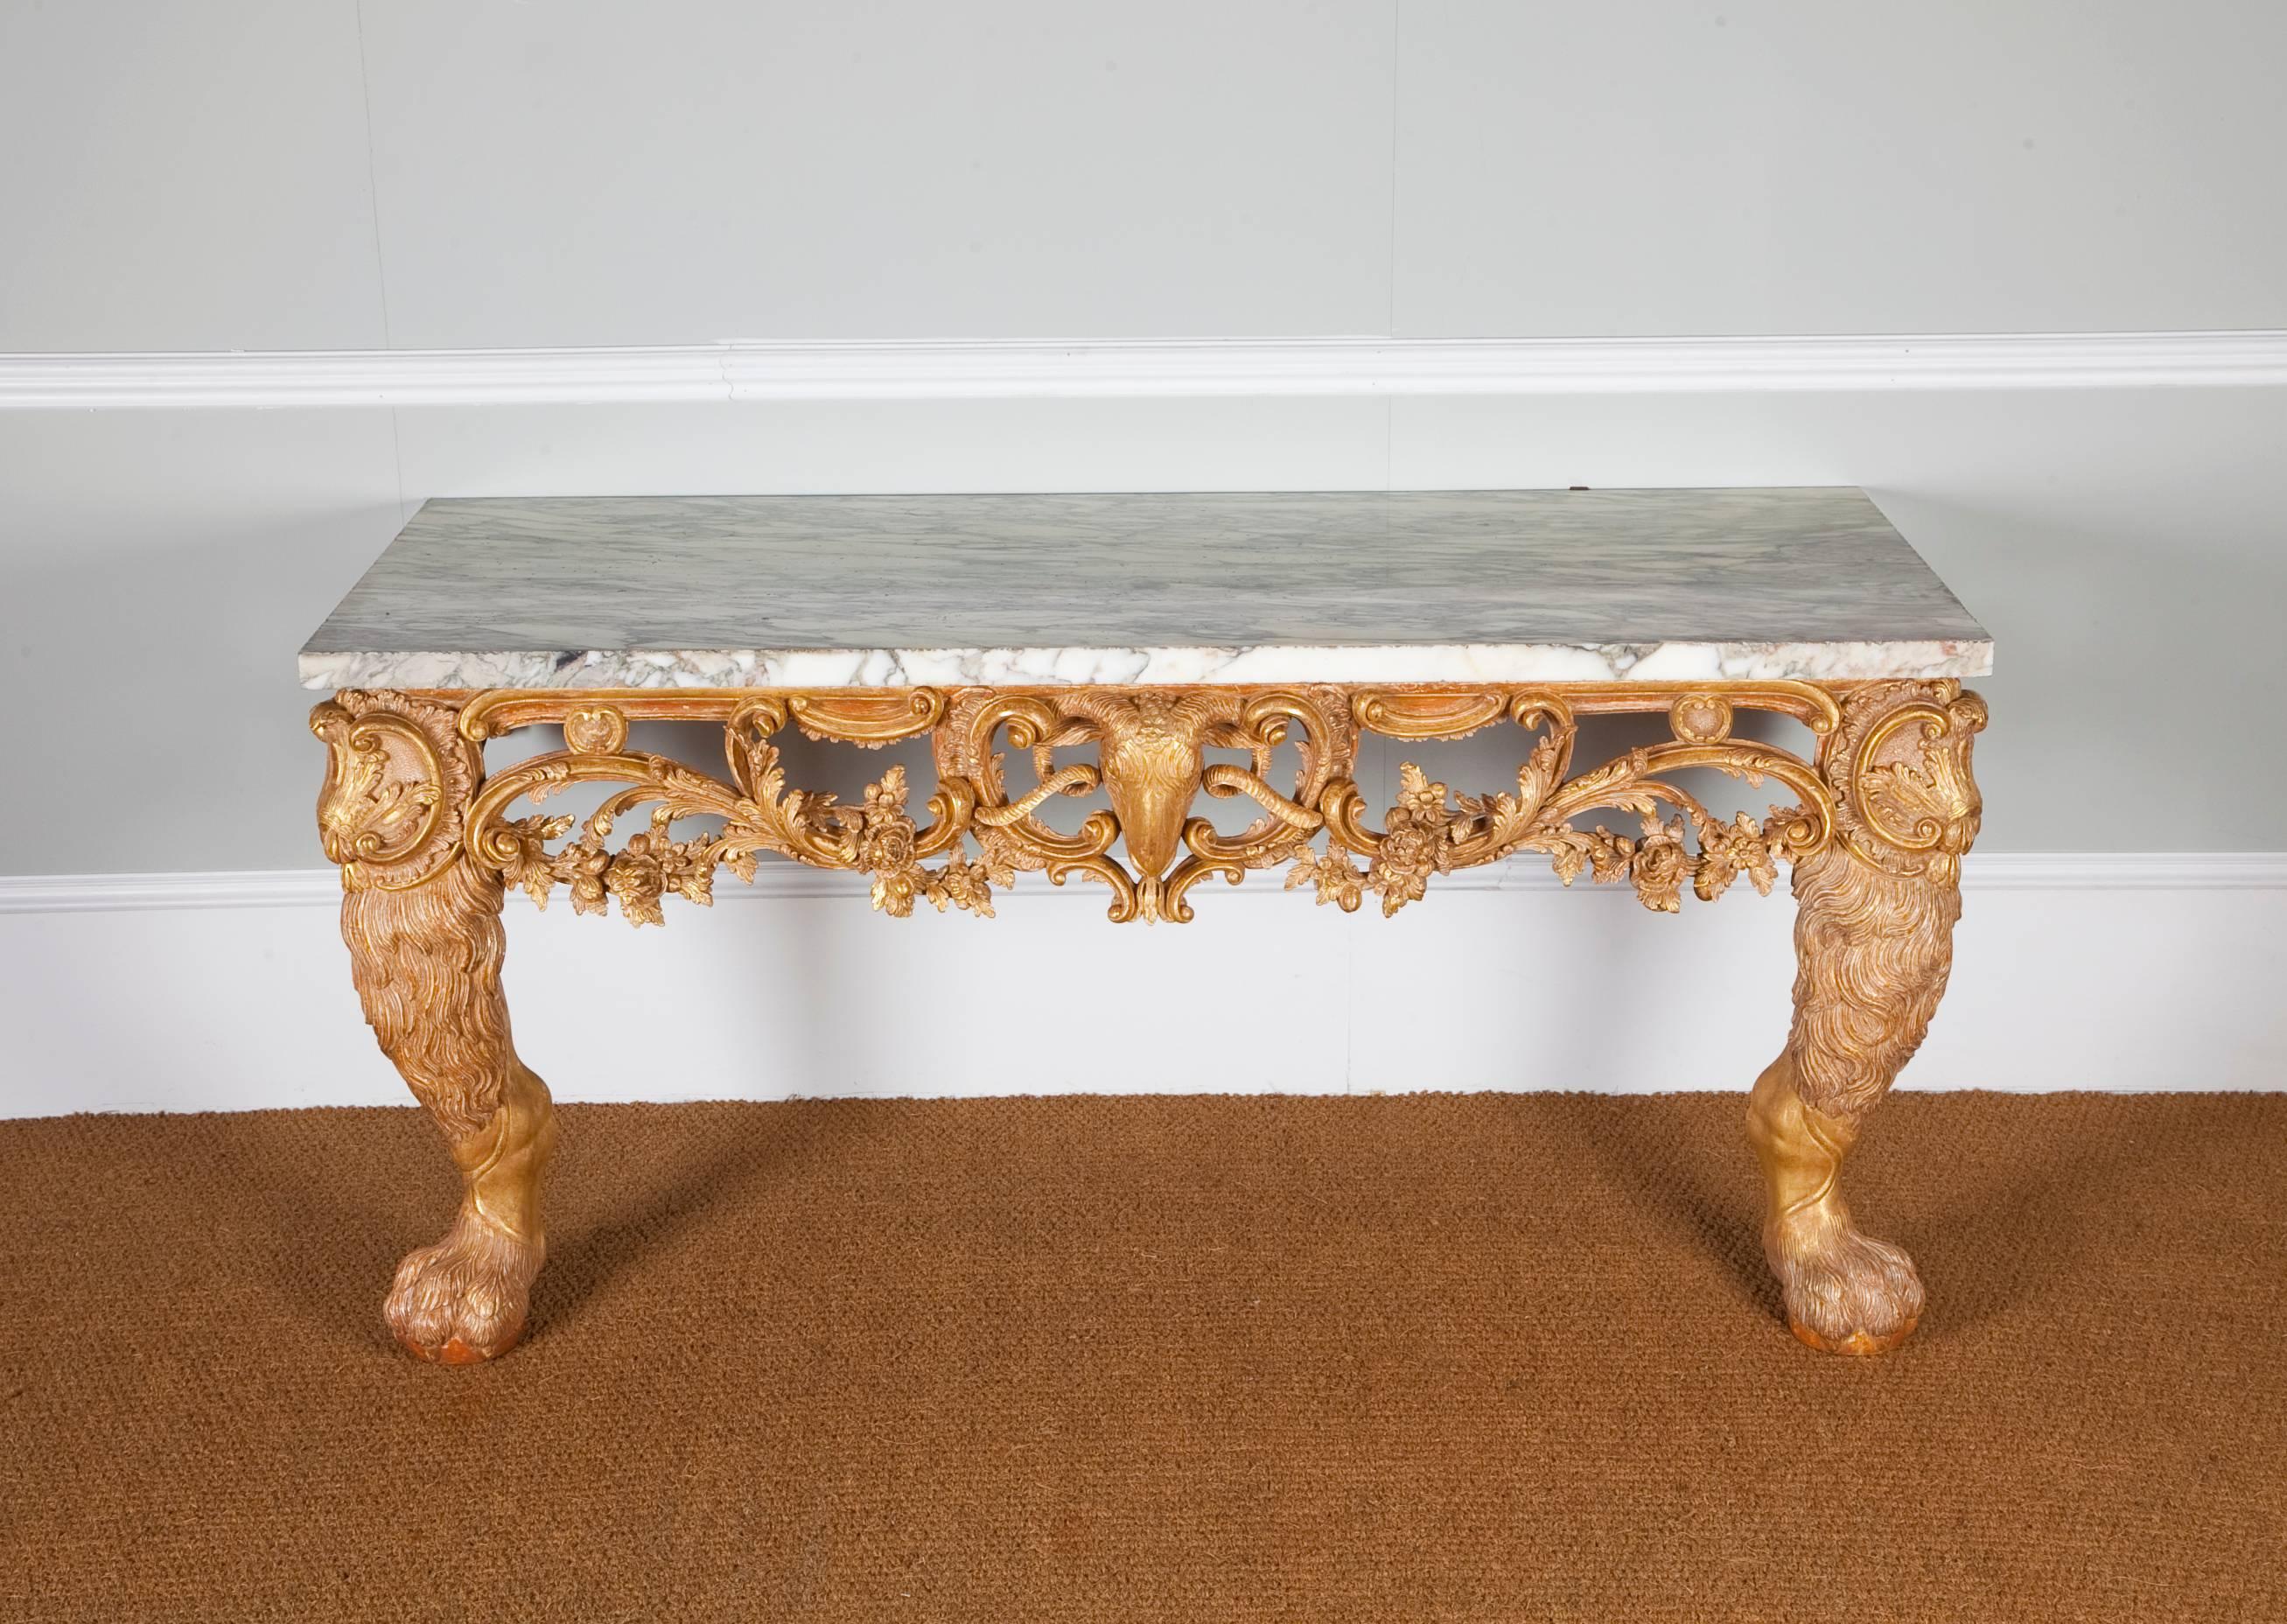 A superbly carved mid-18th century giltwood console table. The later breche violette marble top above a frieze of c-scrolls and acanthus with a central ram's head mask, supported by bold animalistic carved legs. In the manner of Matthias